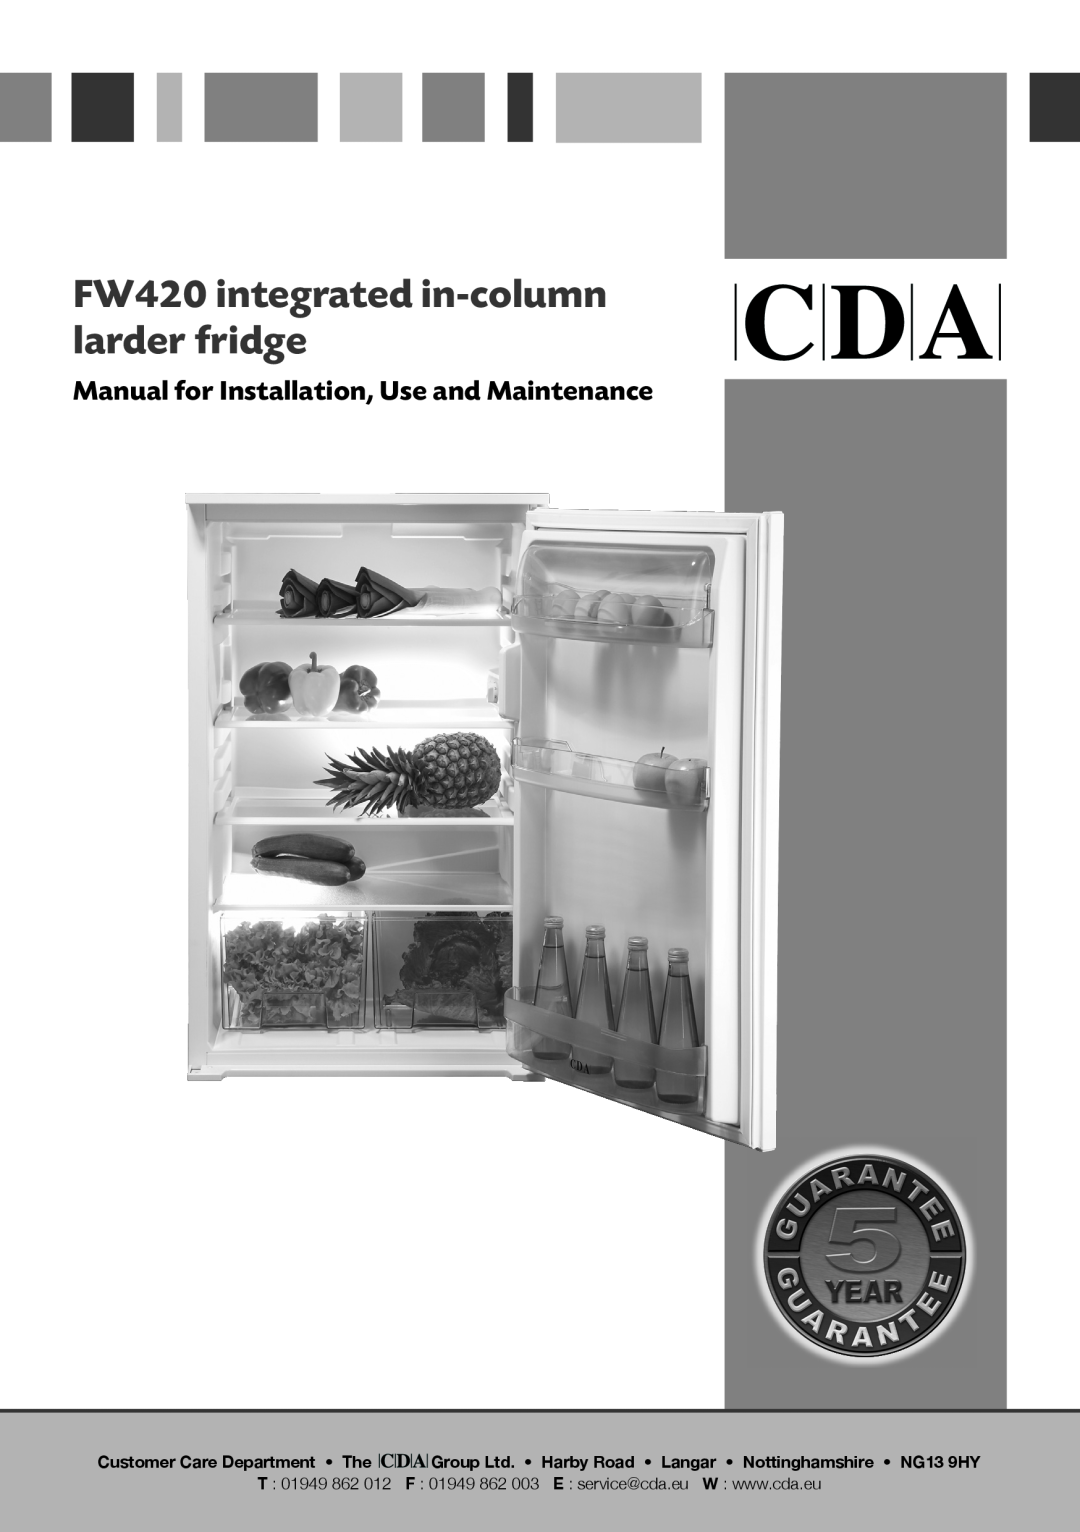 CDA manual FW420 integrated in-column larder fridge, Manual for Installation, Use and Maintenance, T 